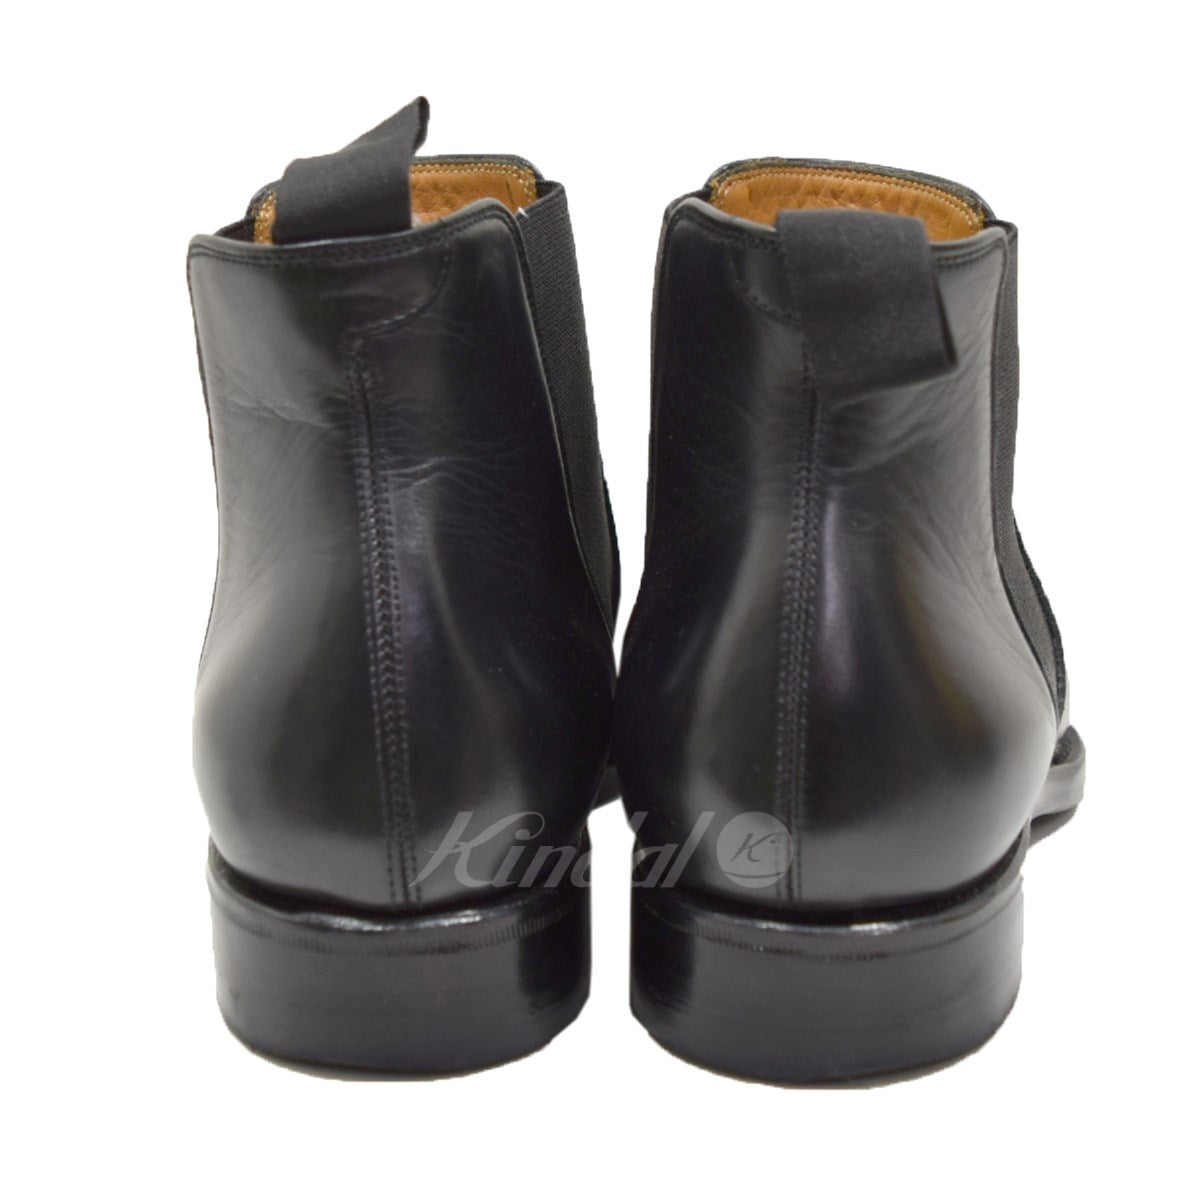 nonnative(ノンネイティブ) DWELLER SIDE GORE BOOTS COW LEATHER ...